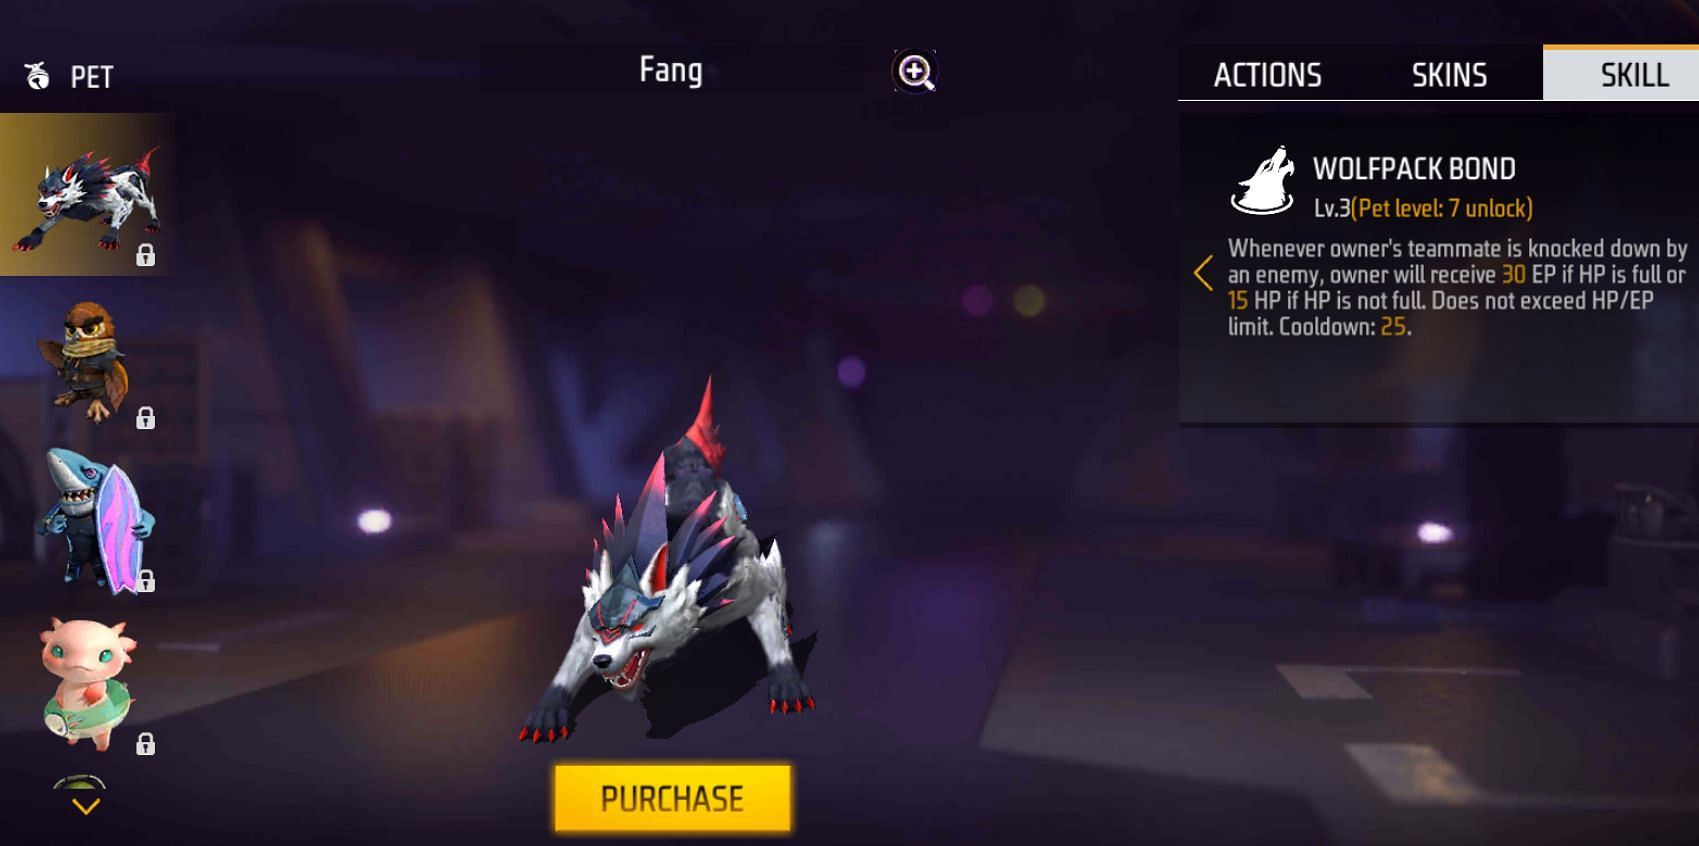 New pet Fang with Wolfpack Bond ability (Image via Garena)